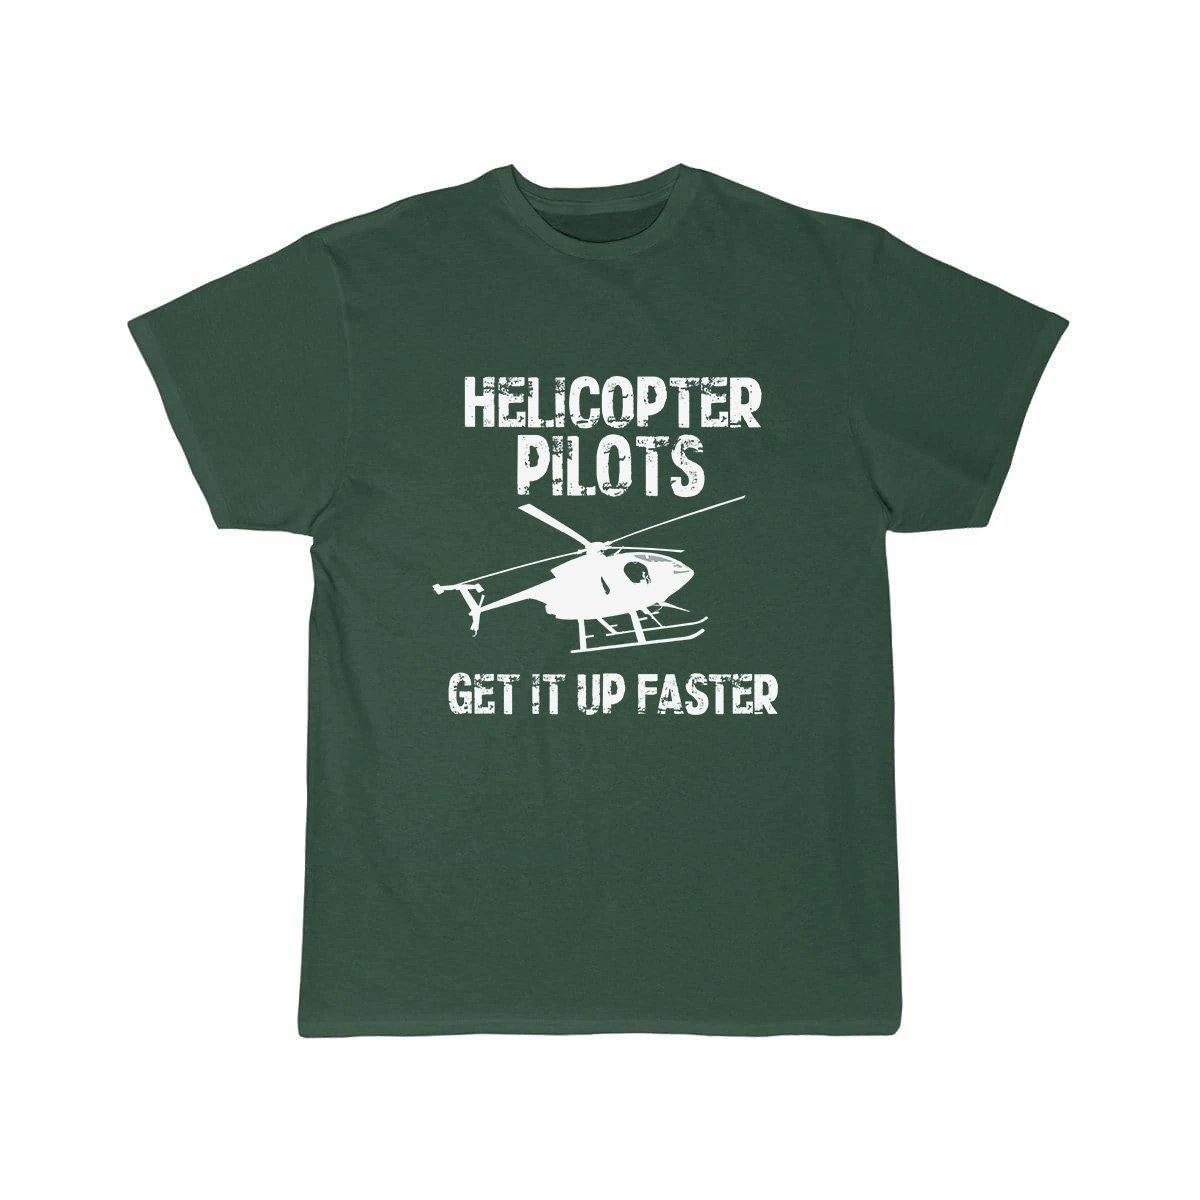 HELICOPTER PILOTS GET IT UP FASTER T SHIRT THE AV8R